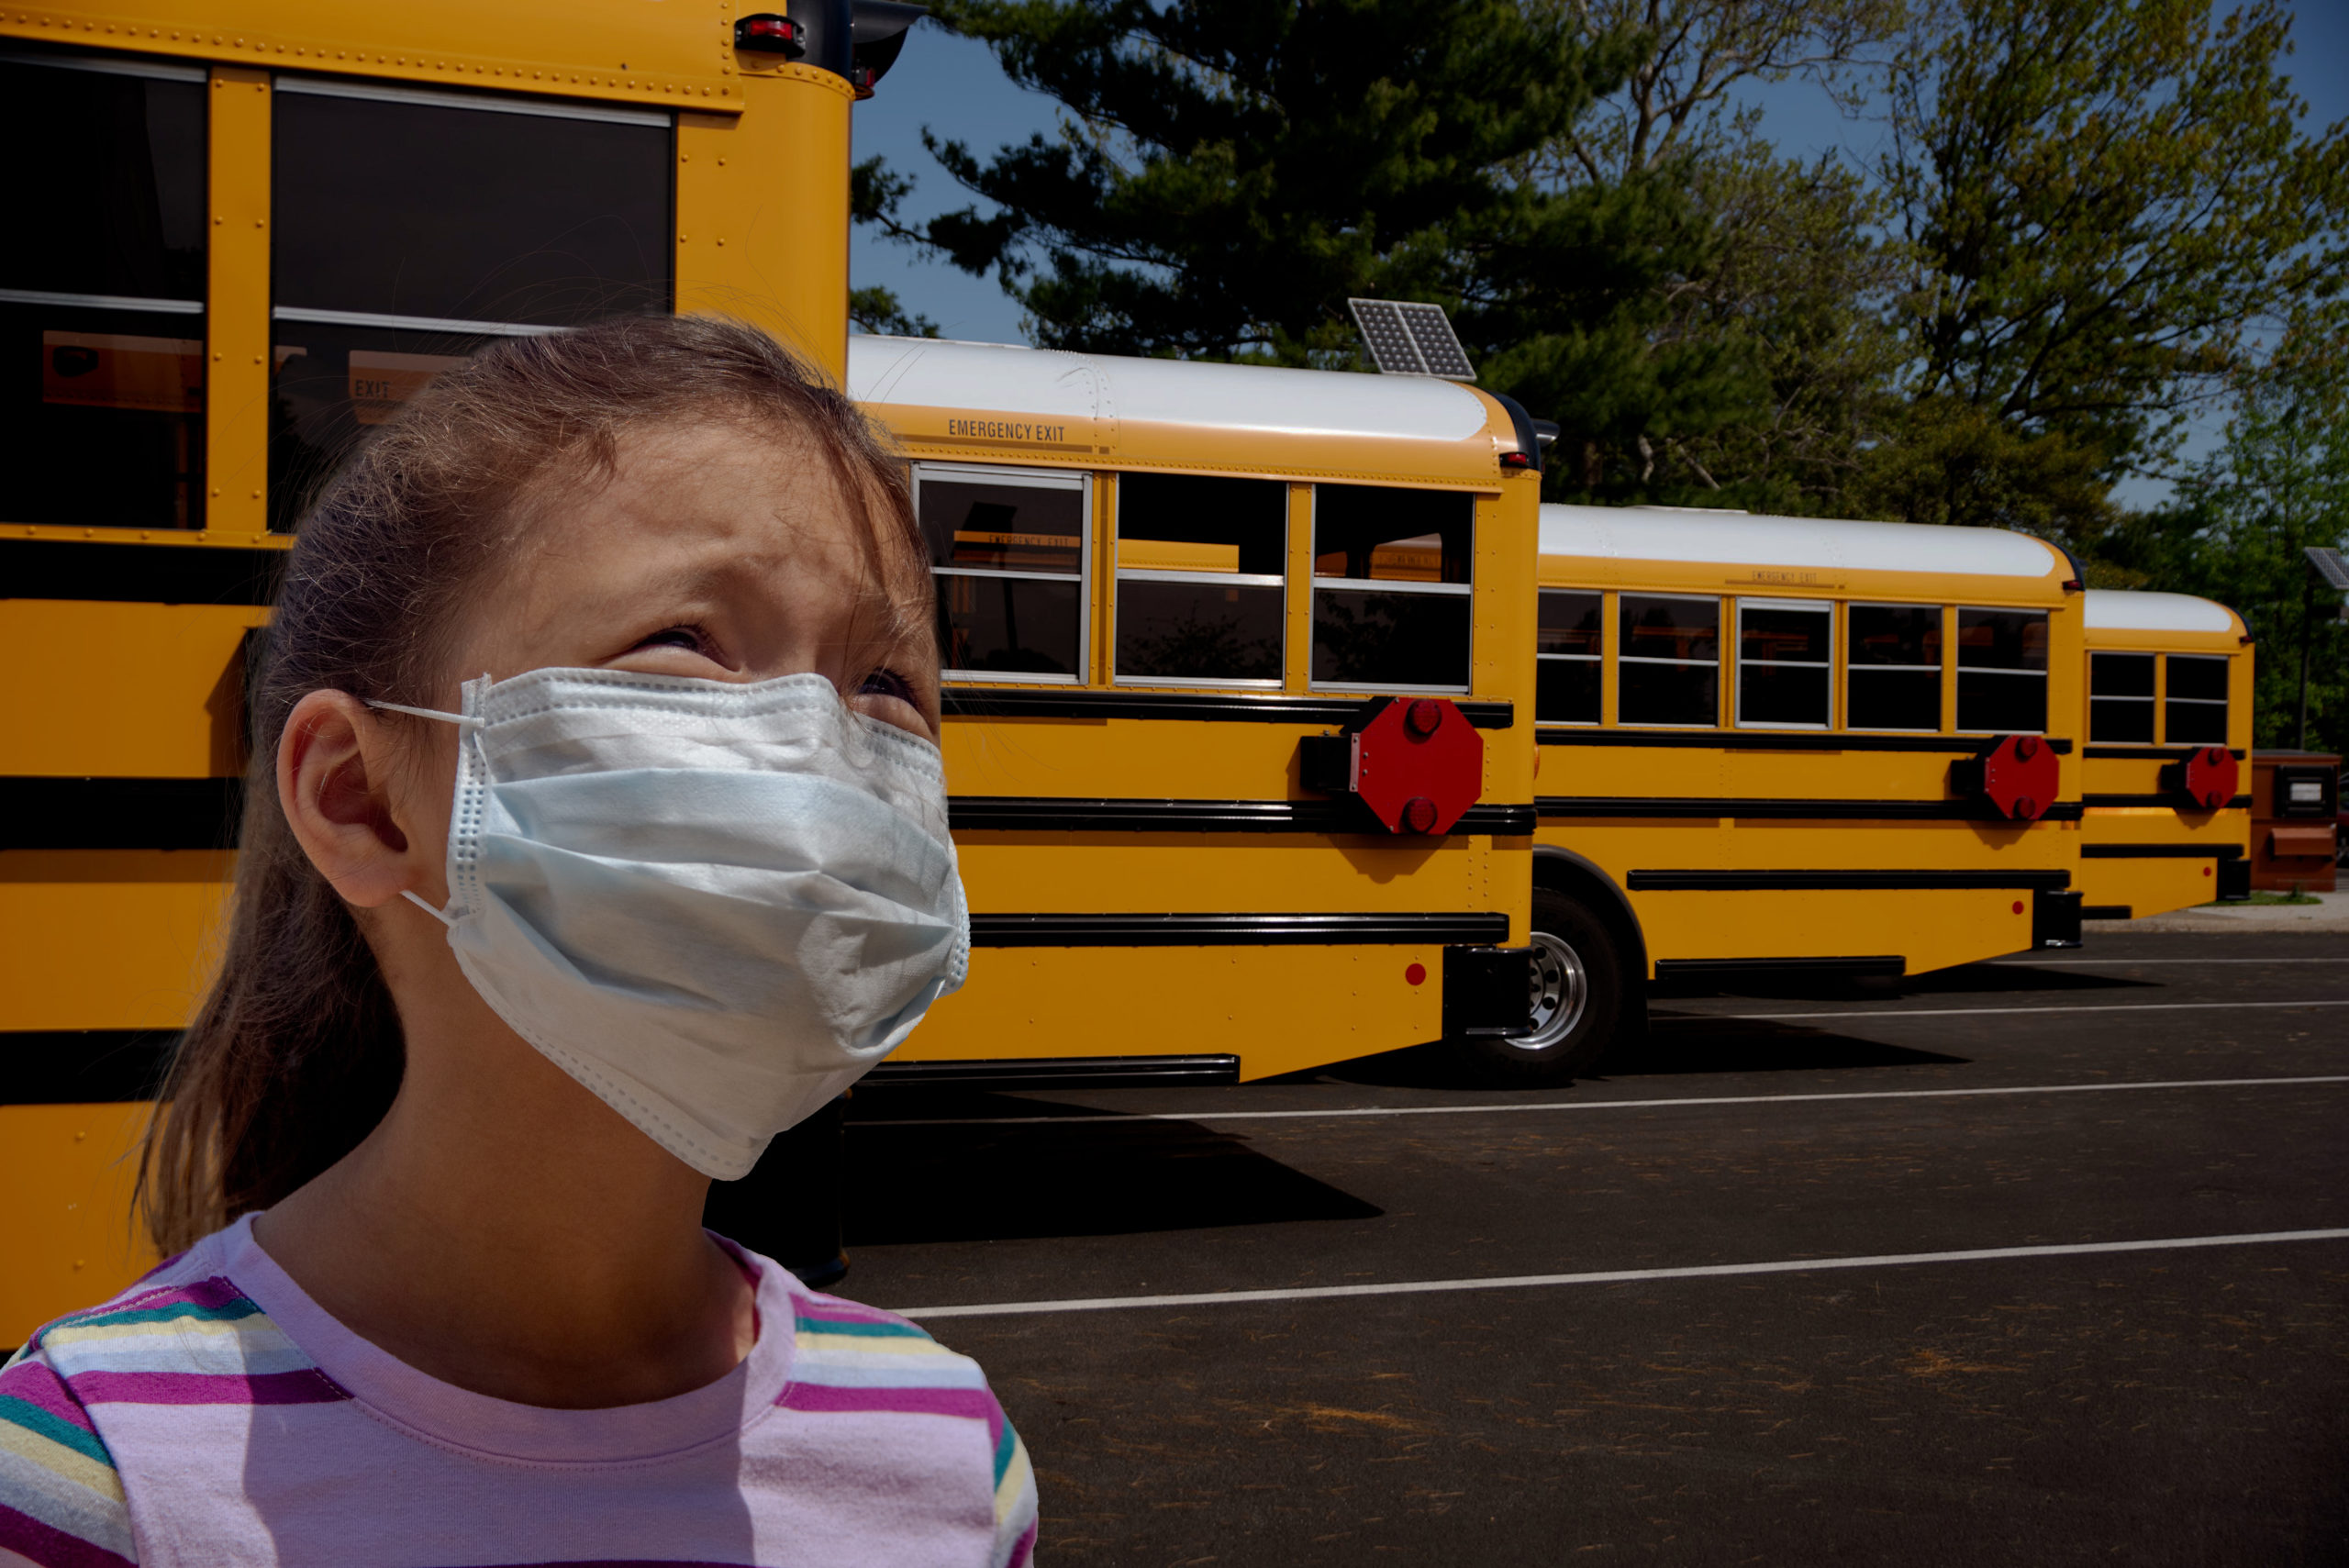 Young girl with concerned look in eyes stands in front of row of school buses wearing a mask to protect her from pandemic while riding Public transportation